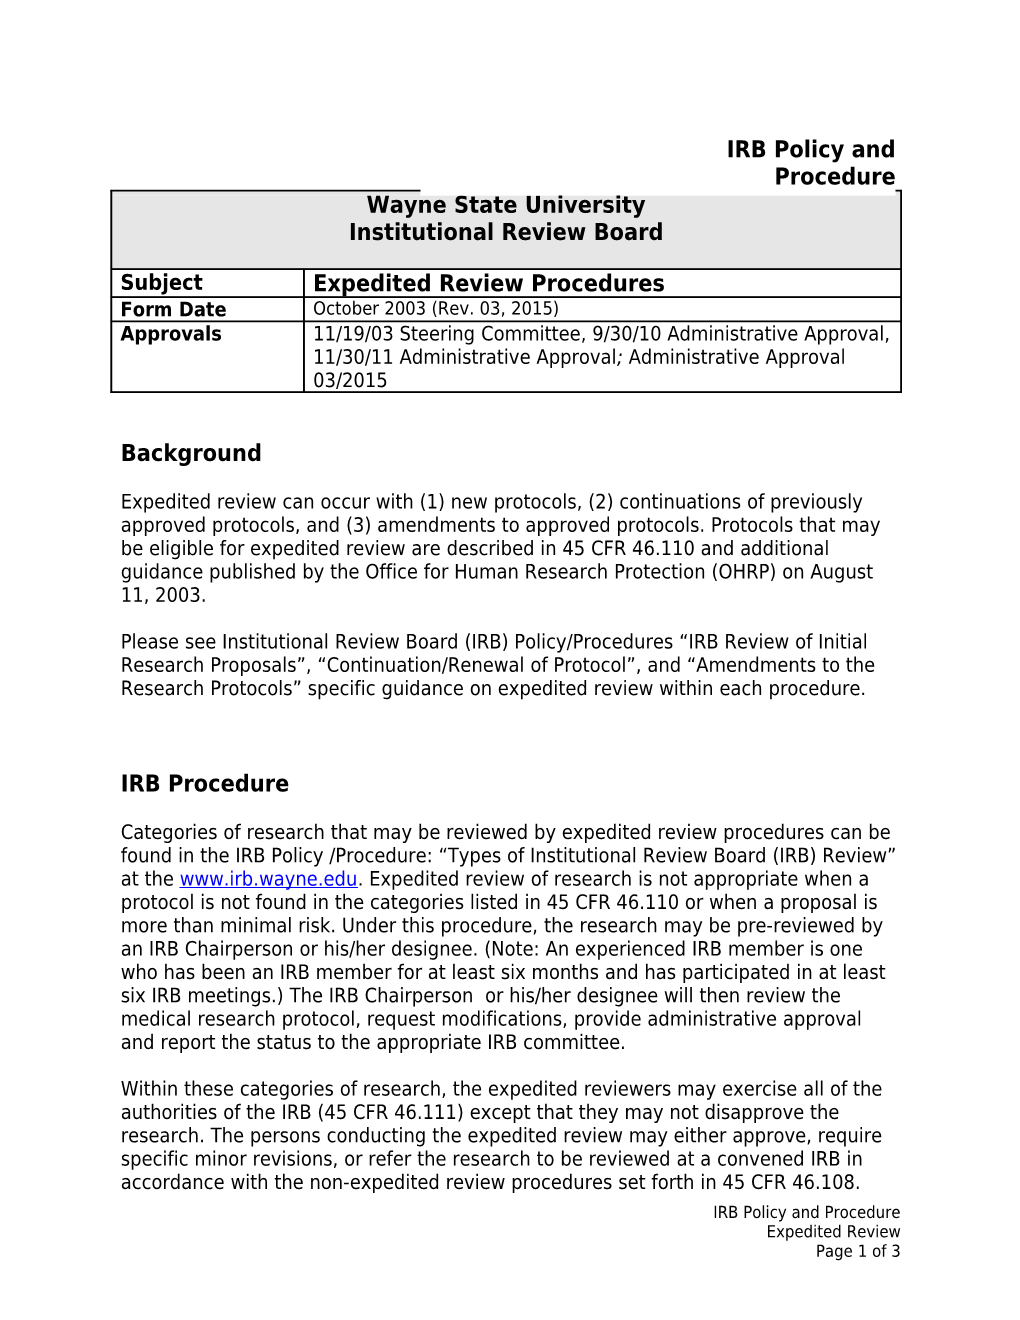 Please See Institutional Review Board (IRB) Policy/Procedures IRB Review of Initial Research